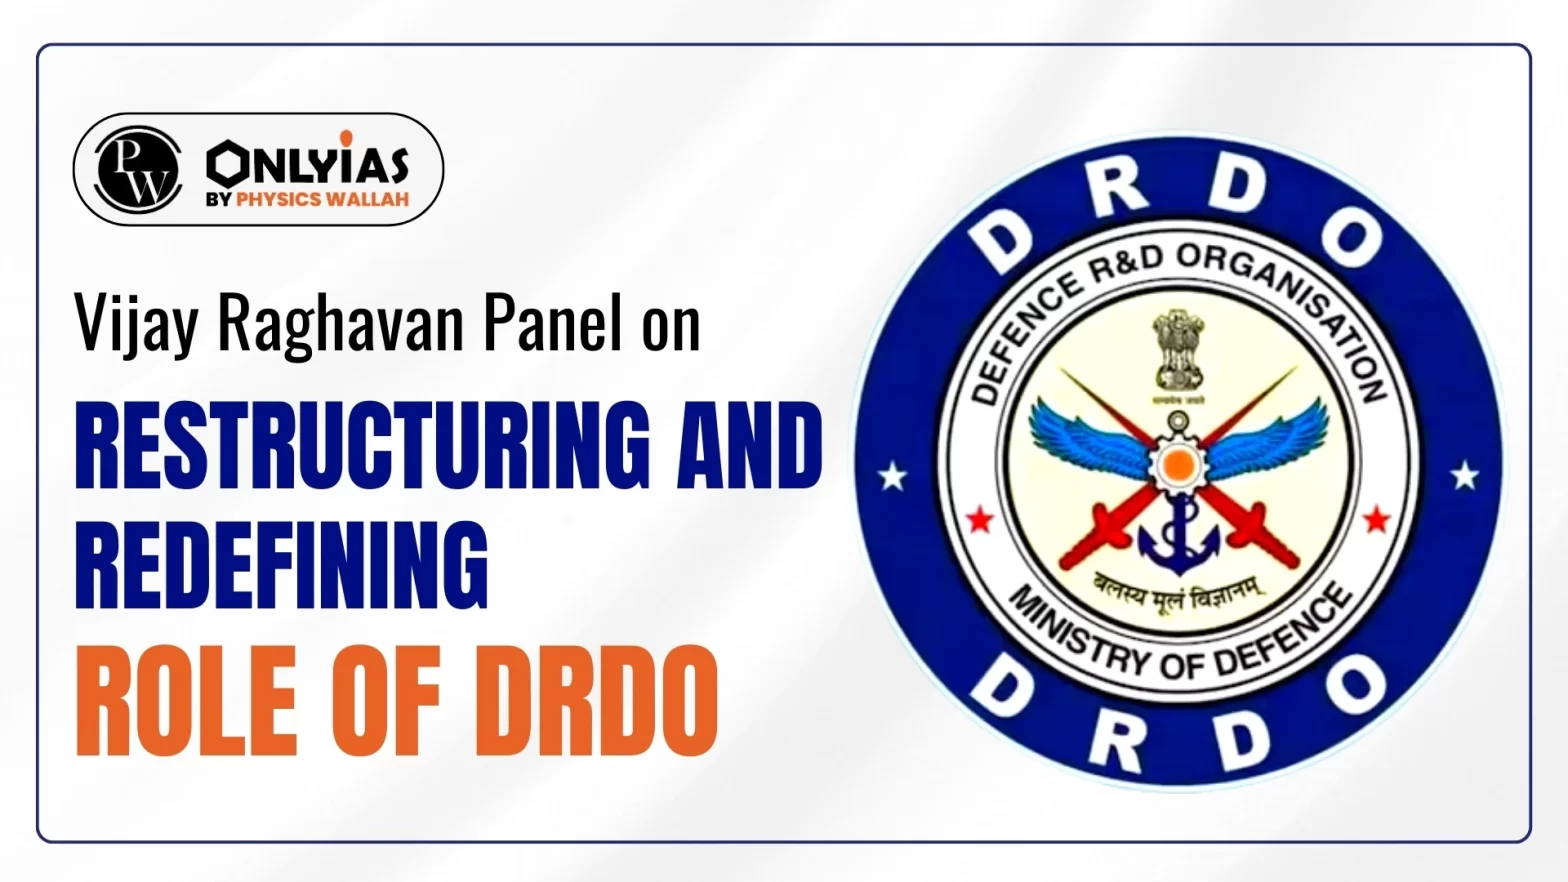 Vijay Raghavan Panel on Restructuring And Redefining Role of DRDO